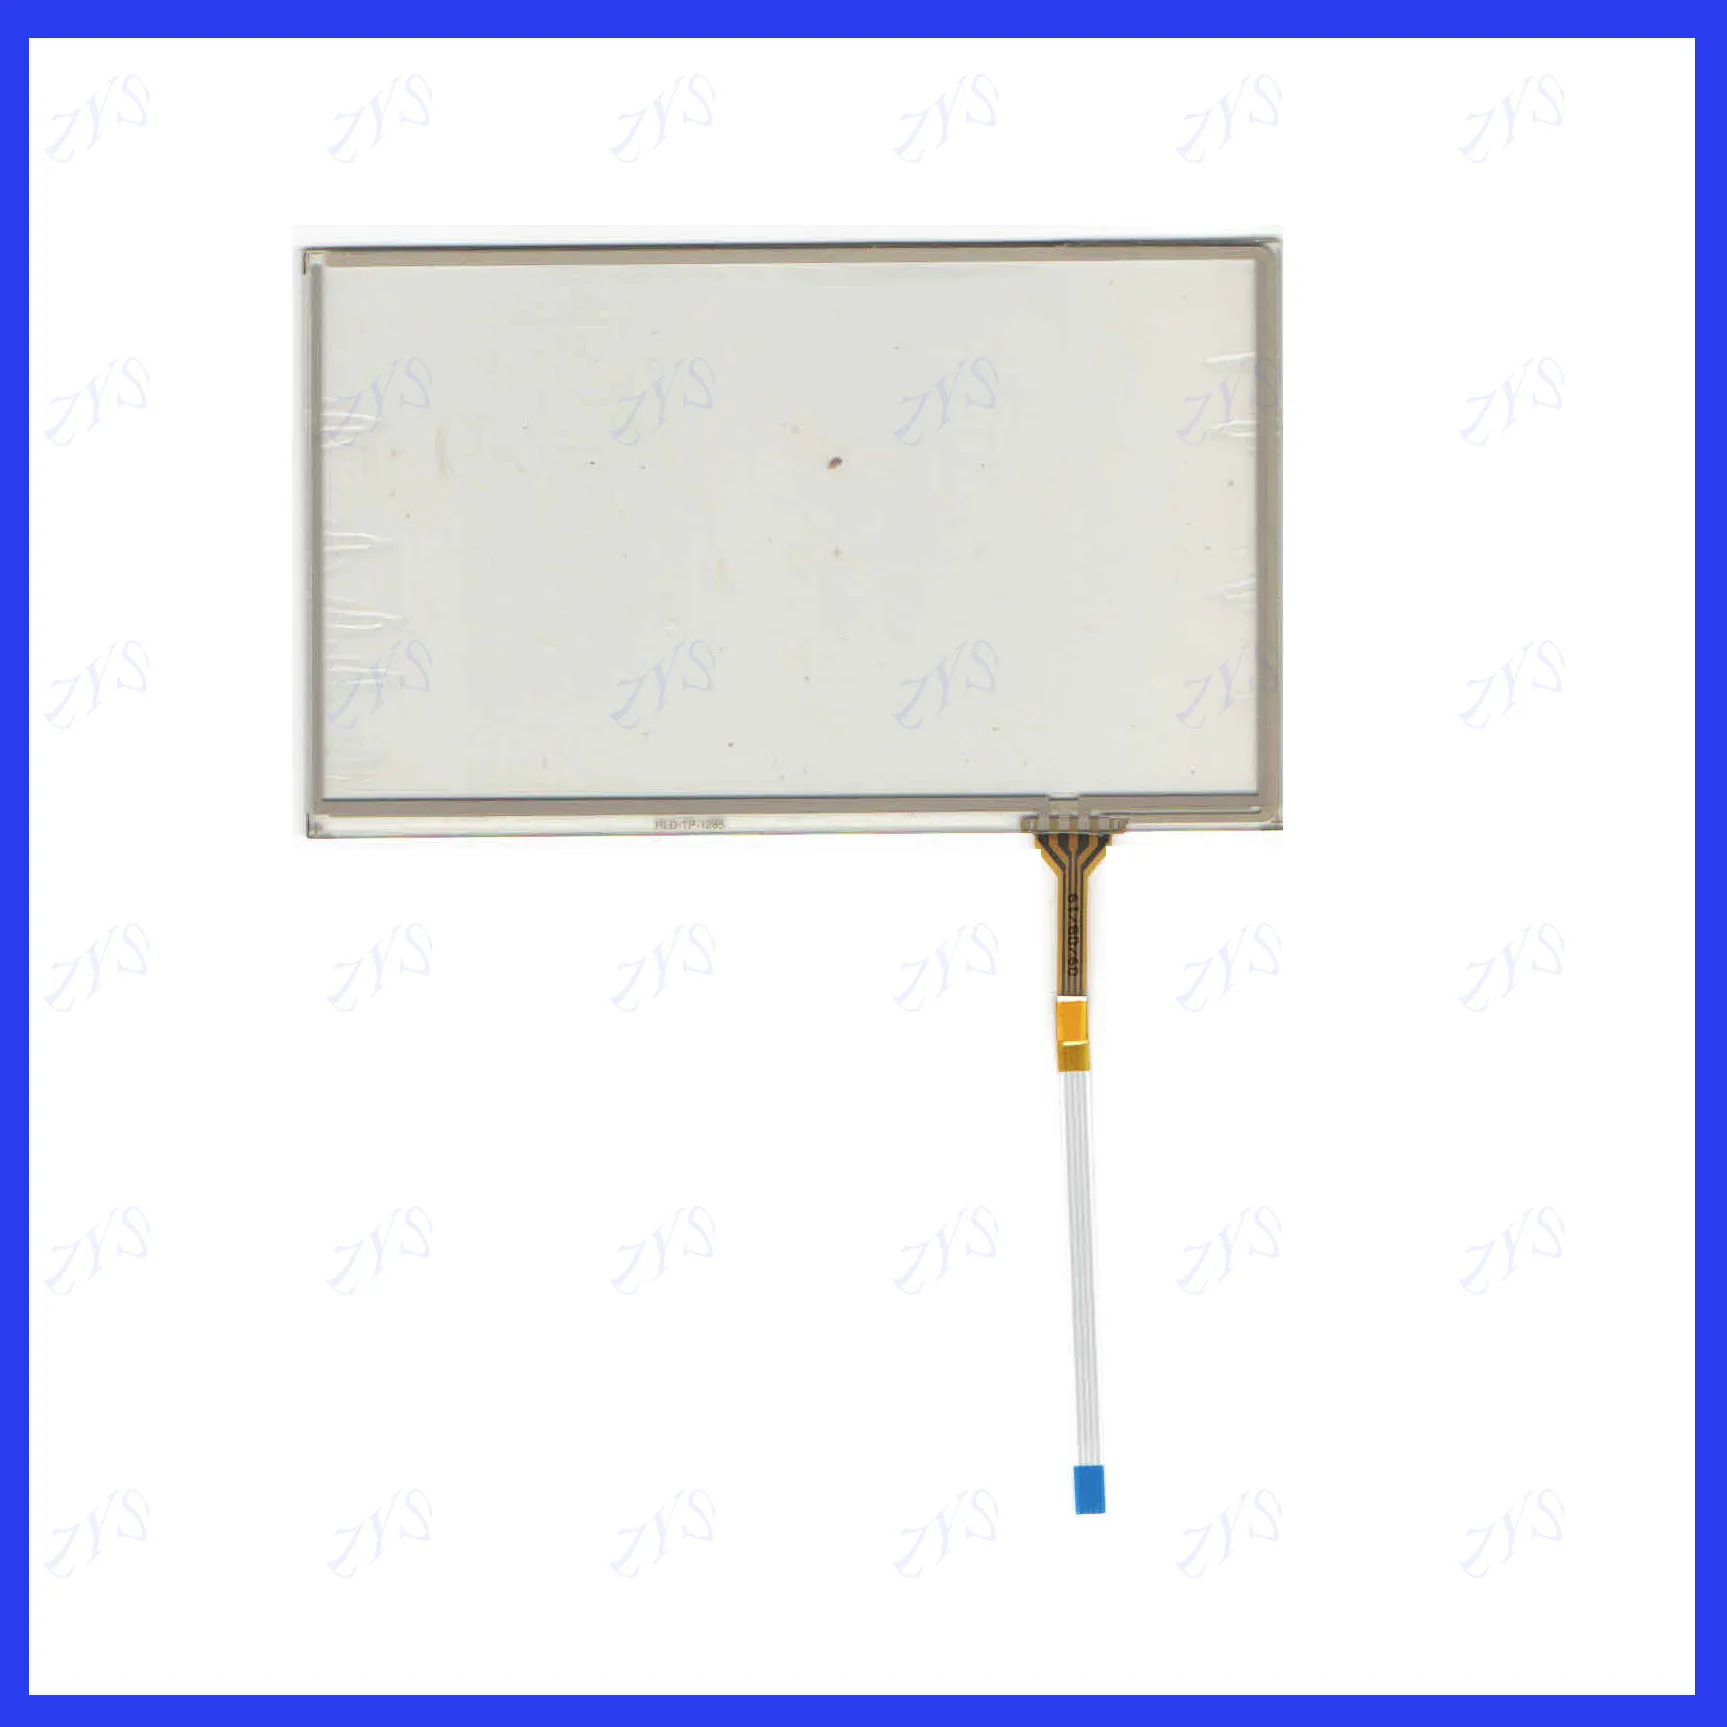 

ZhiYuSun wholesale HLD-TP-2273 this is compatible 165*100mm 4lines resistance screen for car DVD redio HLDTP2273